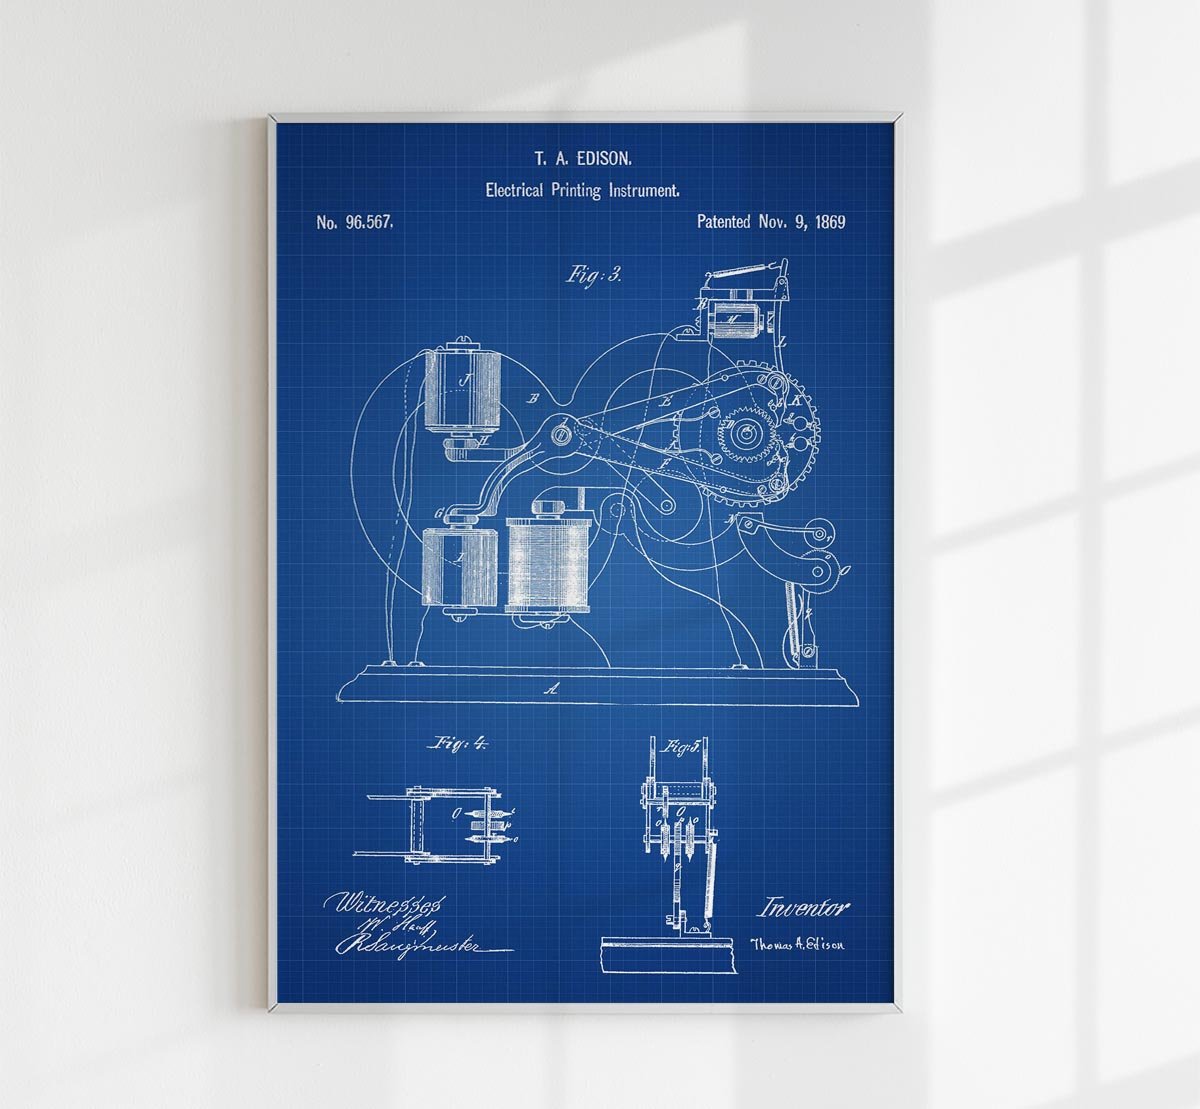 Electrical Printing Instrument Patent Poster